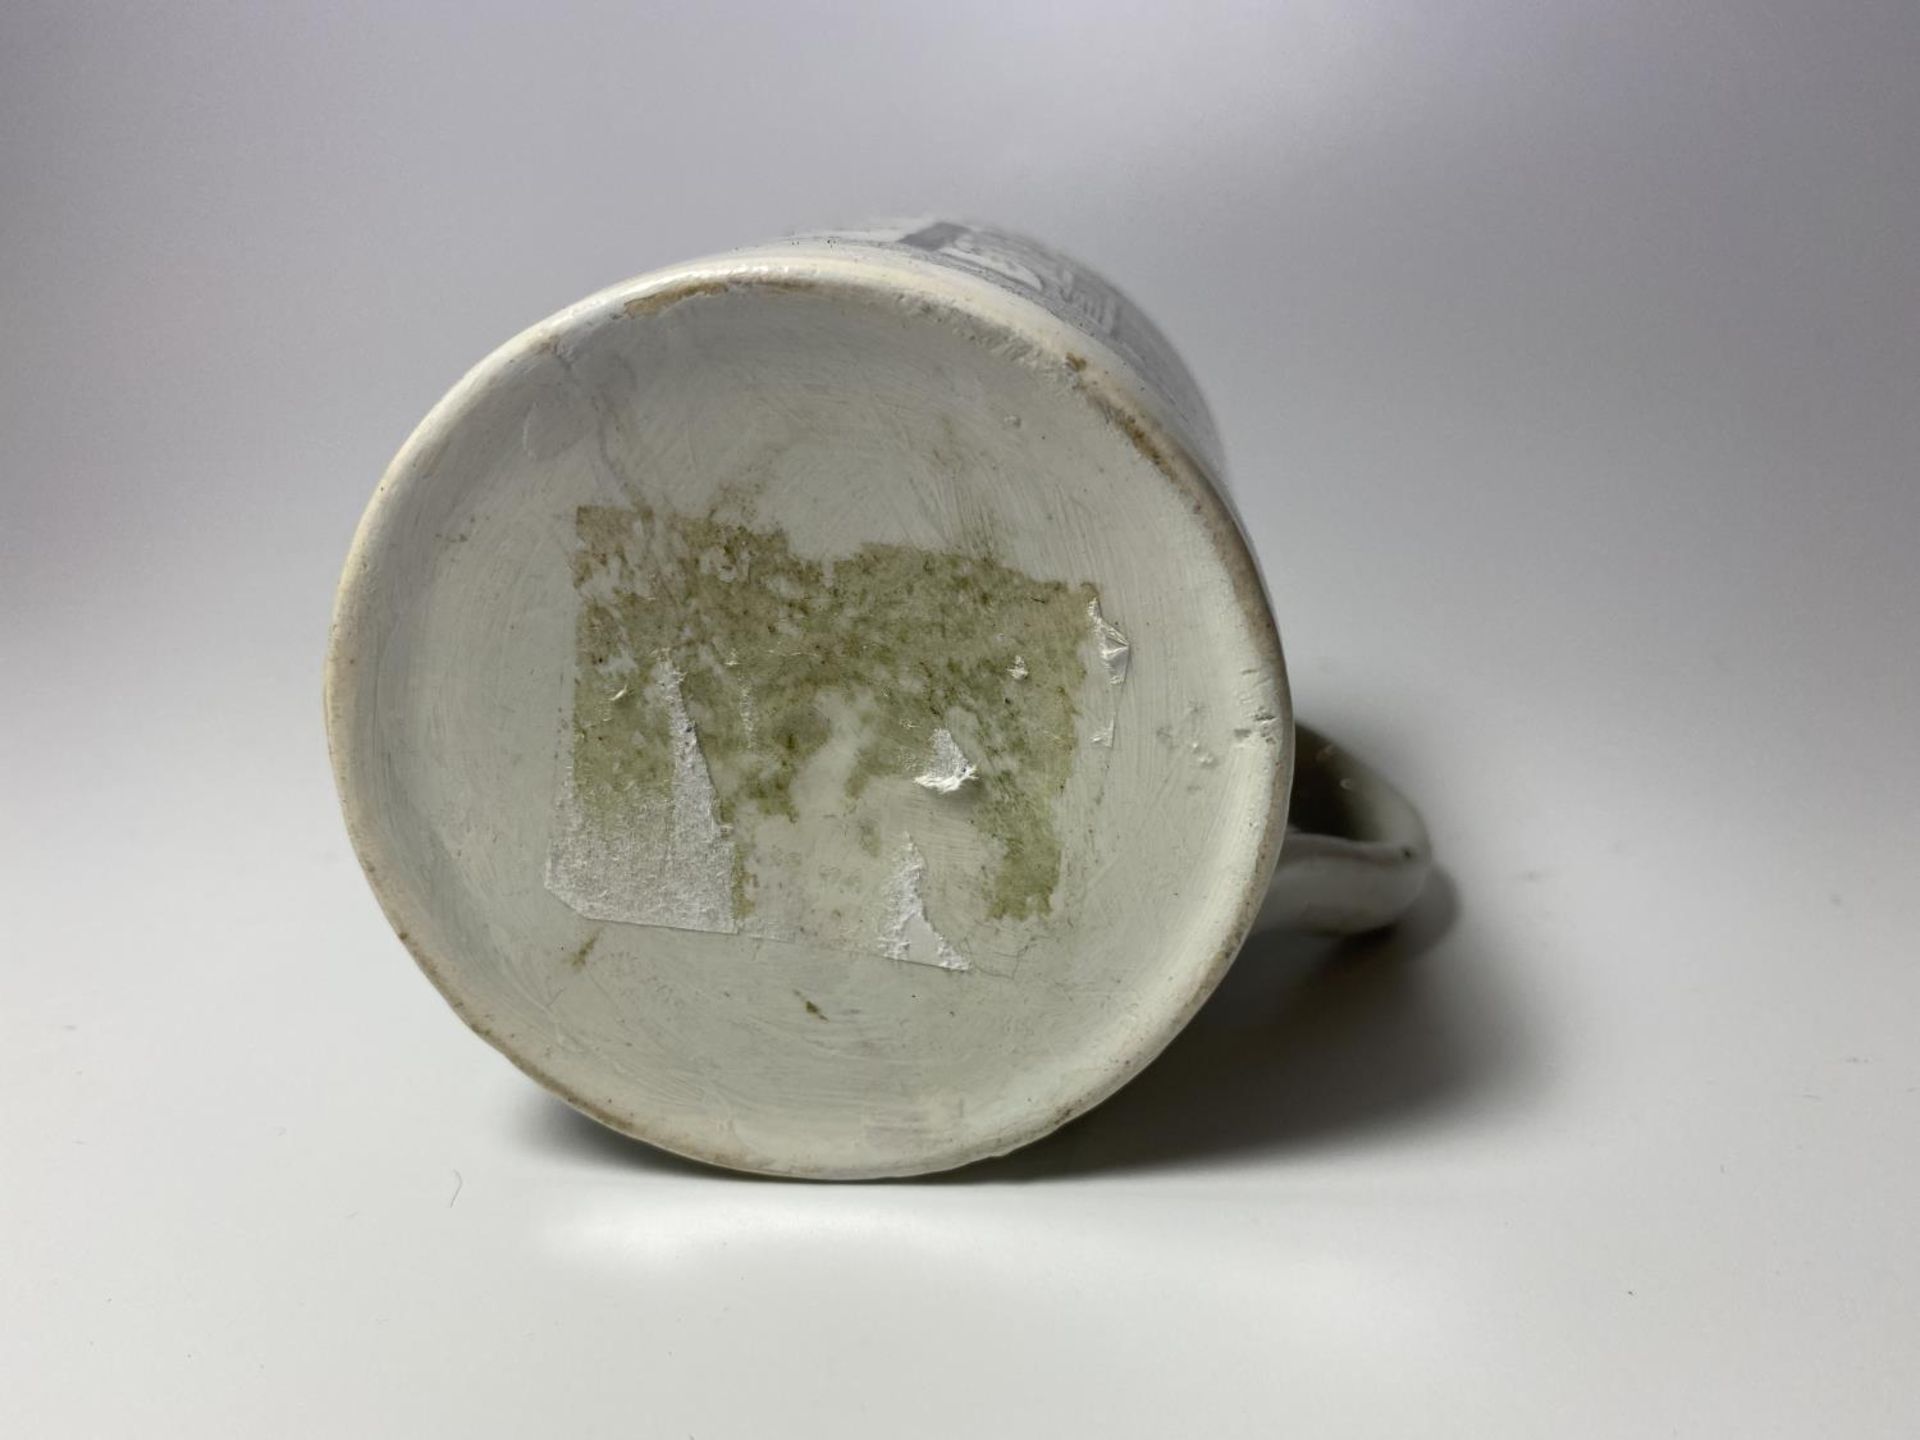 AN EARLY 19TH CENTURY POTTERY POEM CUP / MUG - 'FLOWERS NEVER FADE' (A/F) - Image 4 of 4